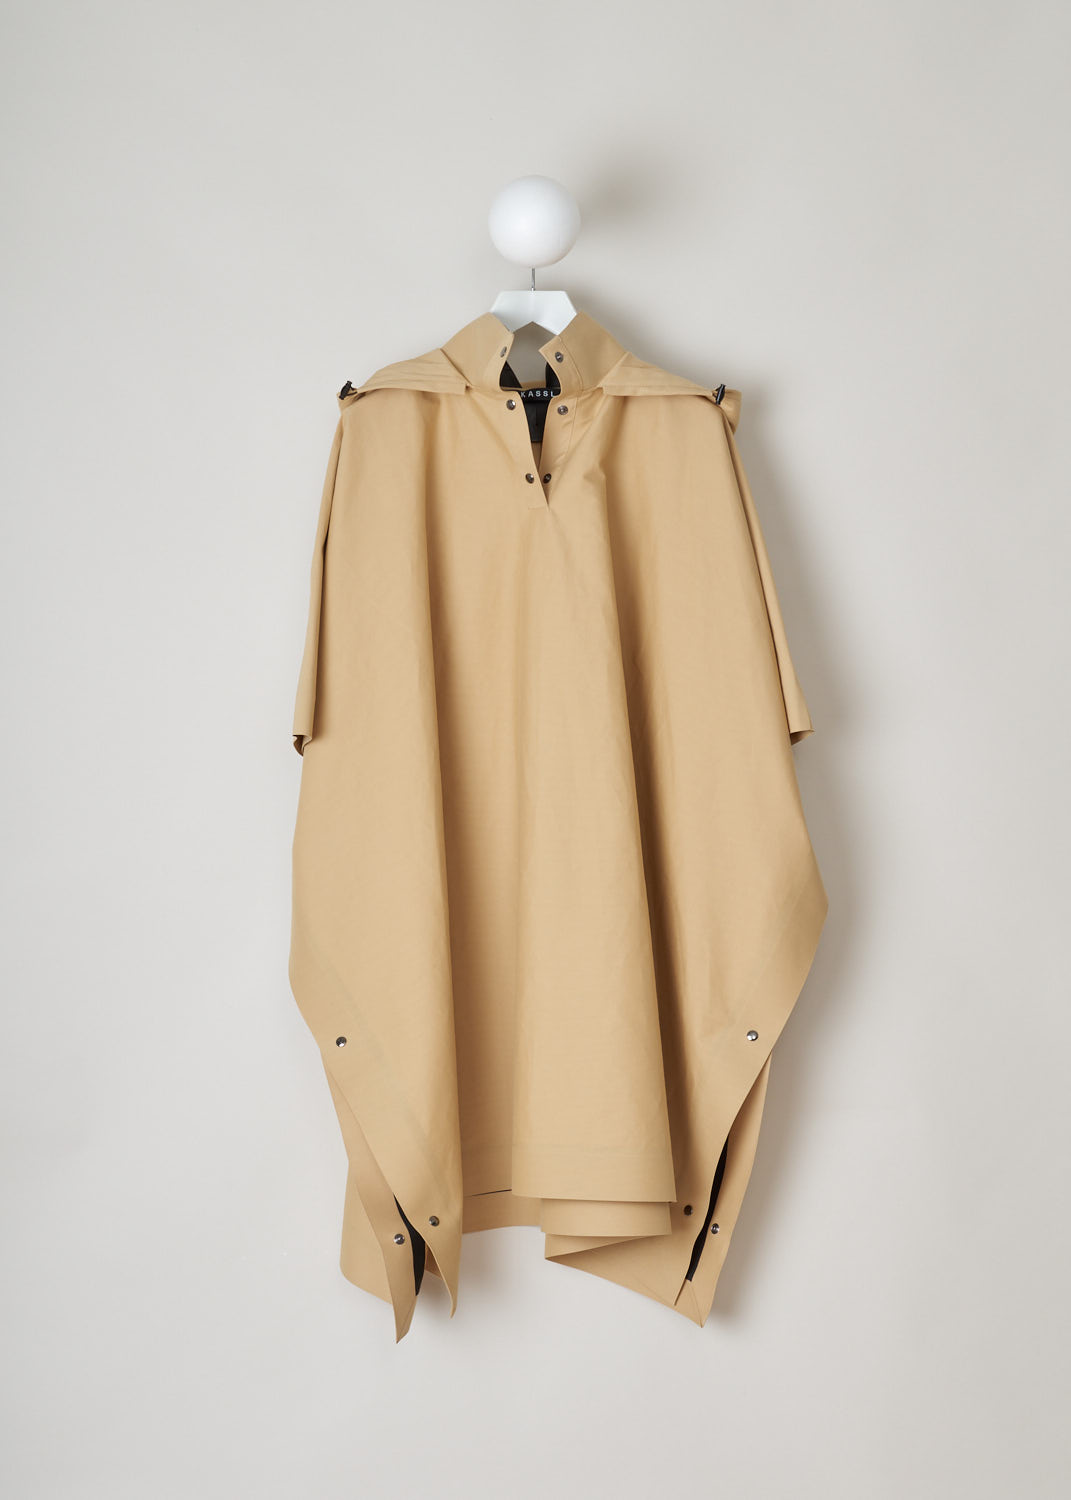 Kassl, Beige trench poncho, poncho_beige_HS21C164070003W, beige, front, Made from a lightweight cotton-blend canvas, featuring a large attached hood with drawstrings and visor. Furthermore this model has high collar and a split-neckline with snap-button fastening, also has snap fastenings at the sides for wind and rain protection